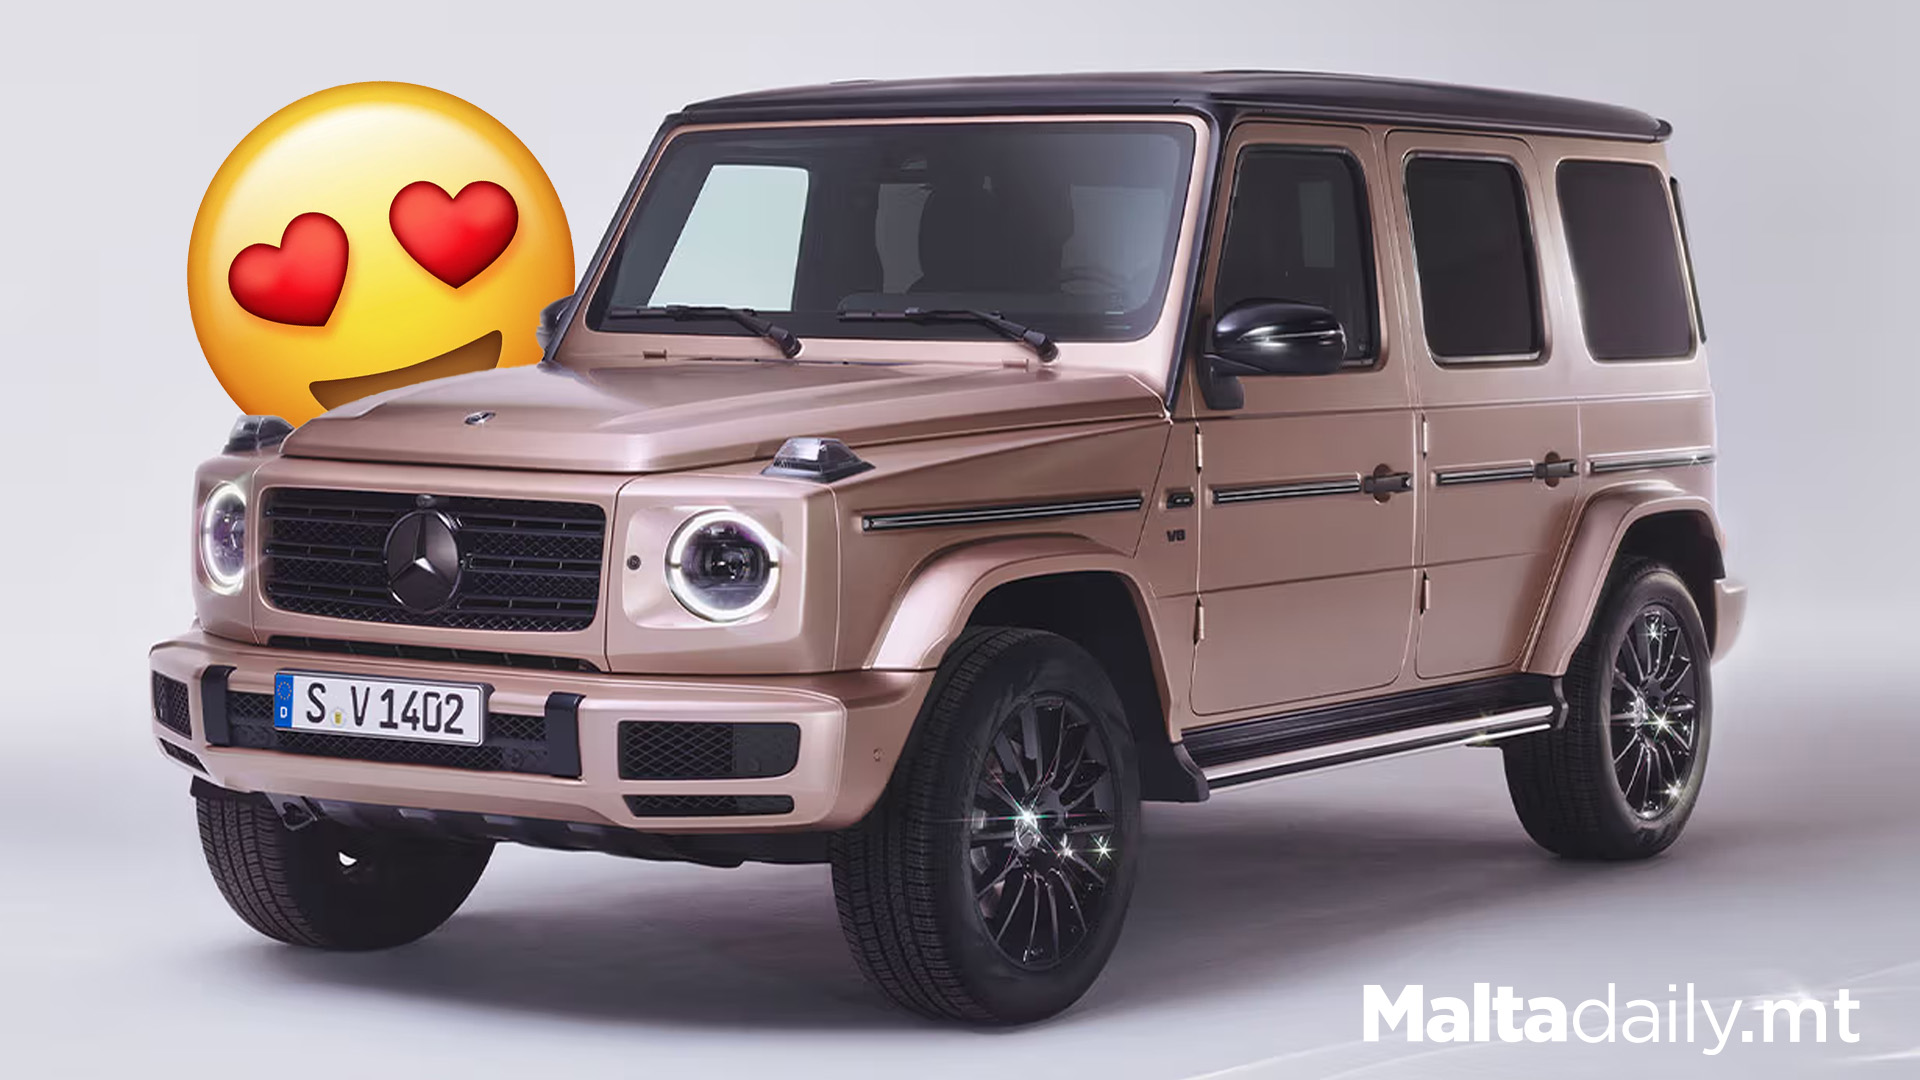 DID YOU SEE MERCEDES BENZ’S ROSE GOLD VALENTINE EDITION VEHICLE?